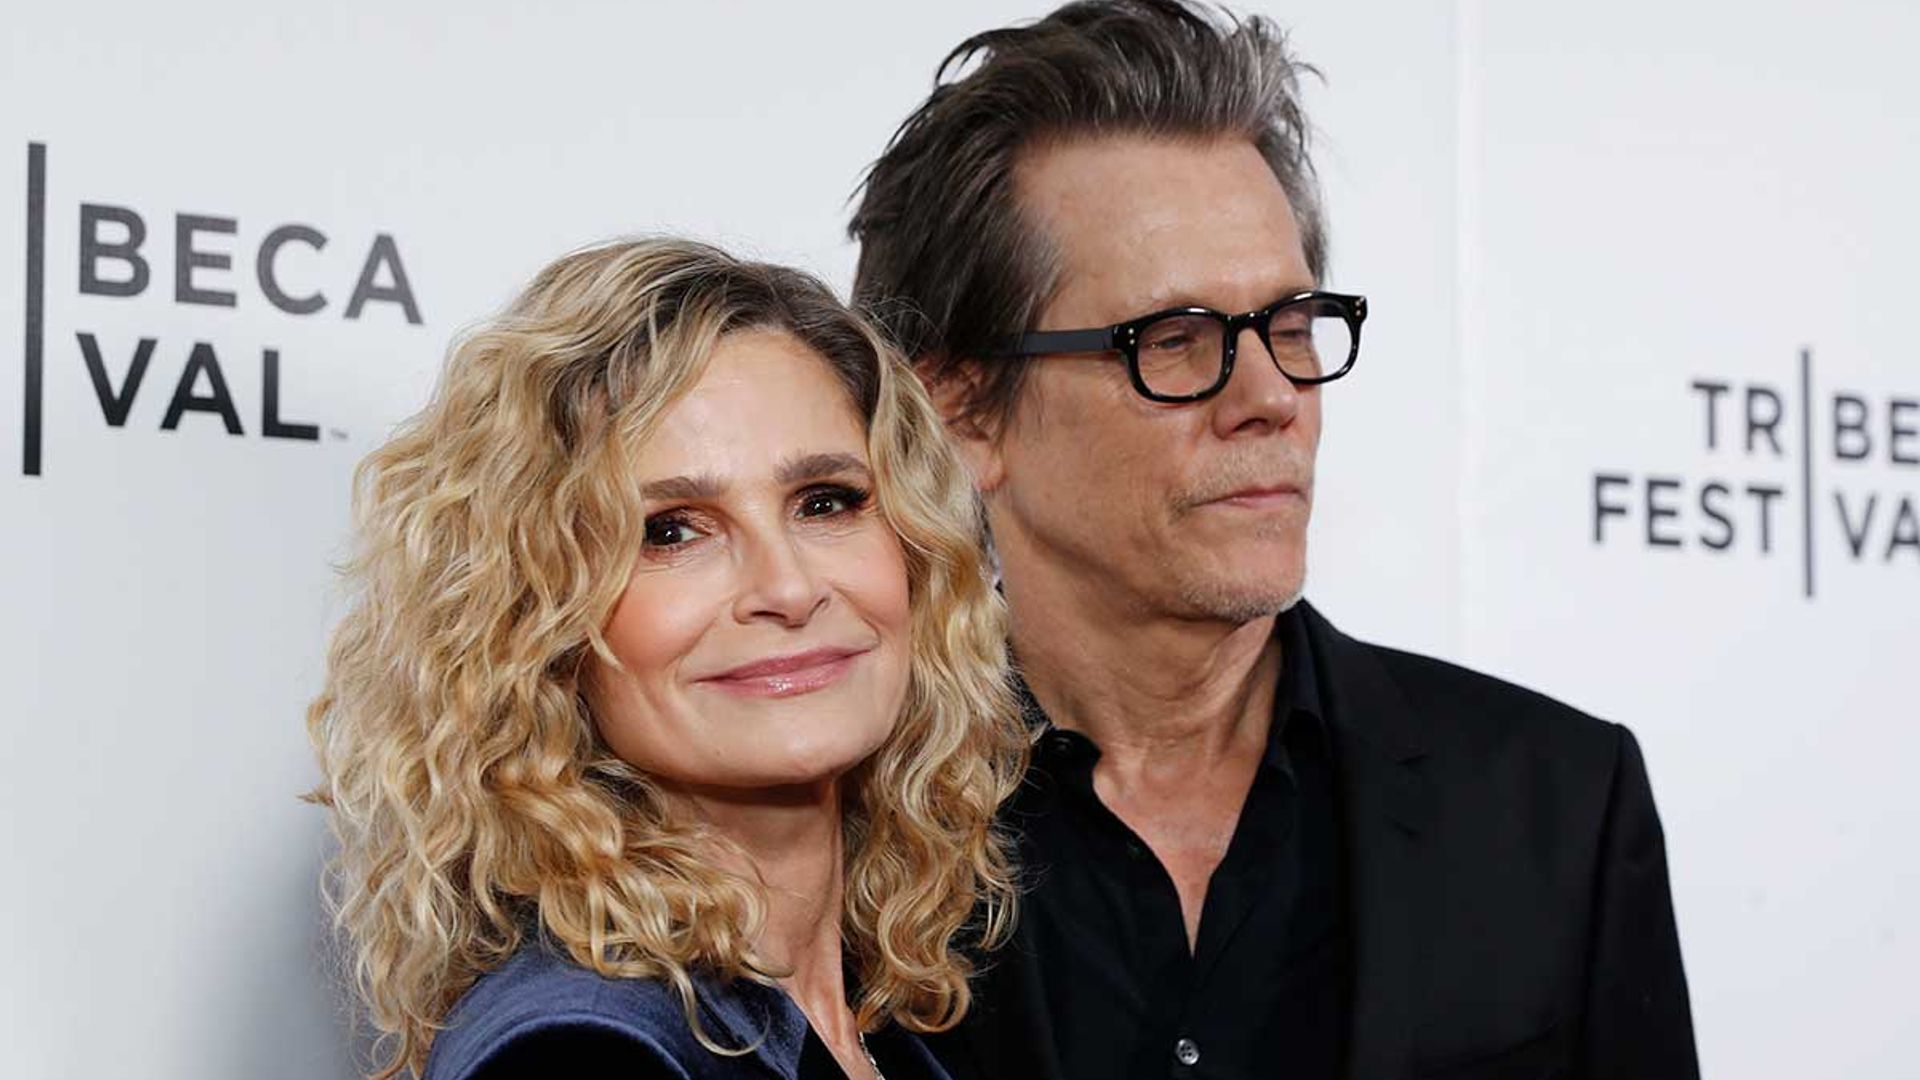 kyra sedgwick husband kevin bacon wasnt first choice awkward argument fans react